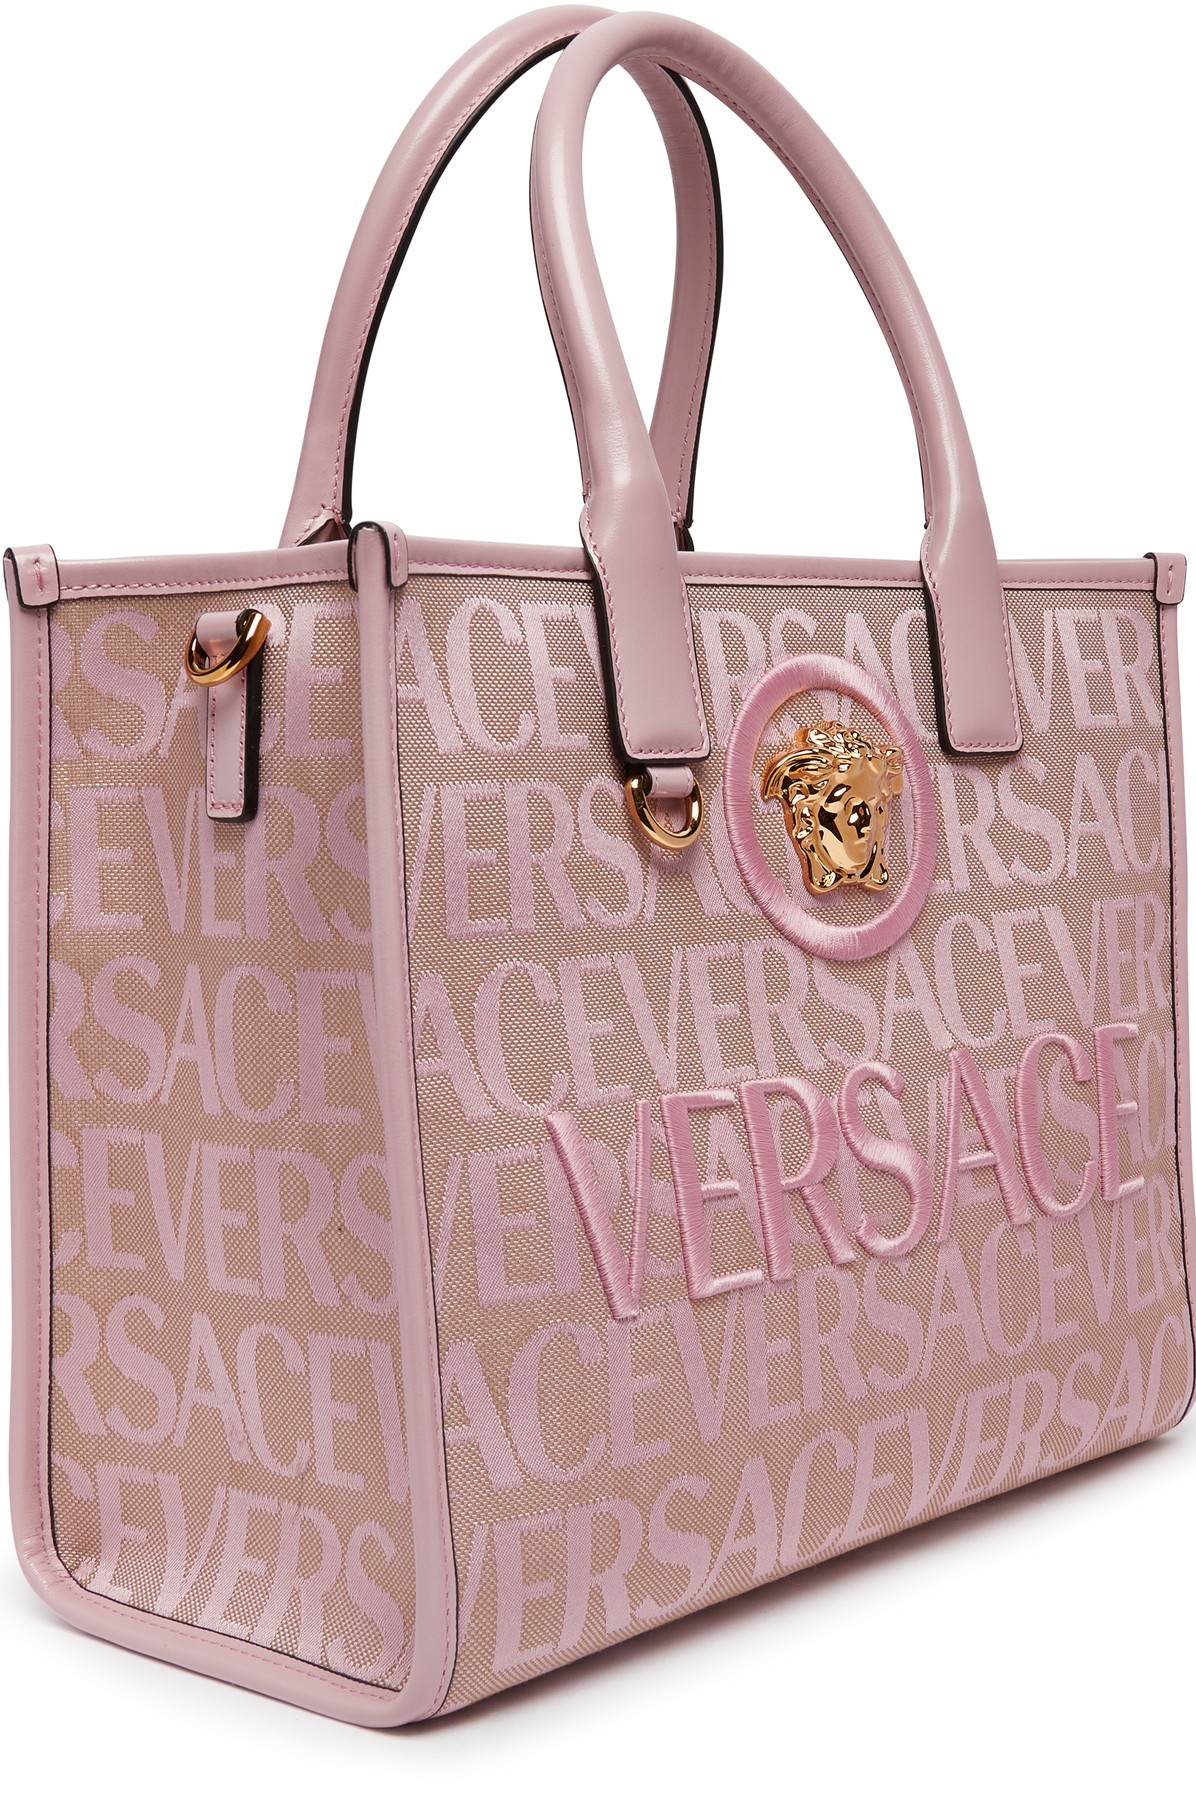 Versace Allover Small Tote Bag in Pink - Versace